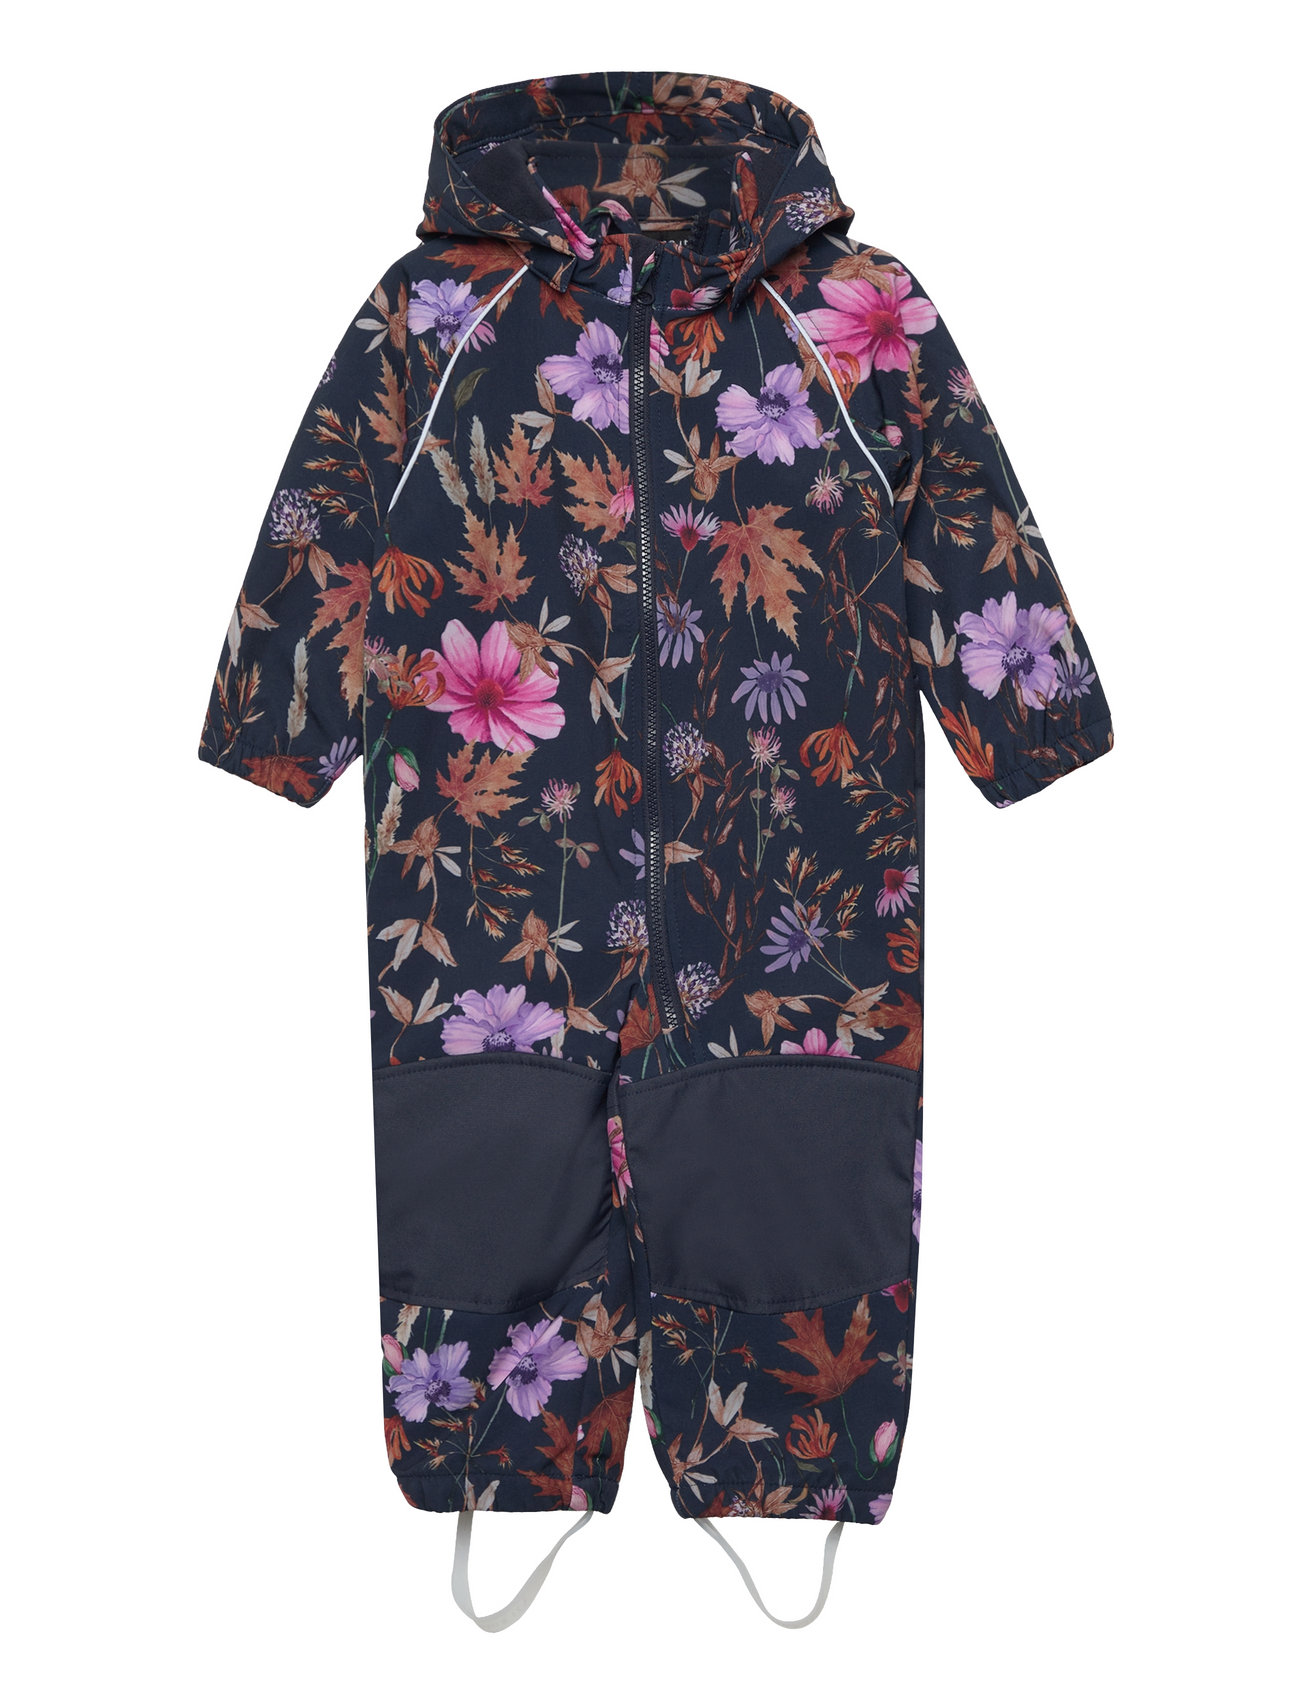 name it Nmfalfa08 Suit Autumn Flower Fo Noos - 31.35 €. Buy Coveralls from  name it online at Boozt.com. Fast delivery and easy returns